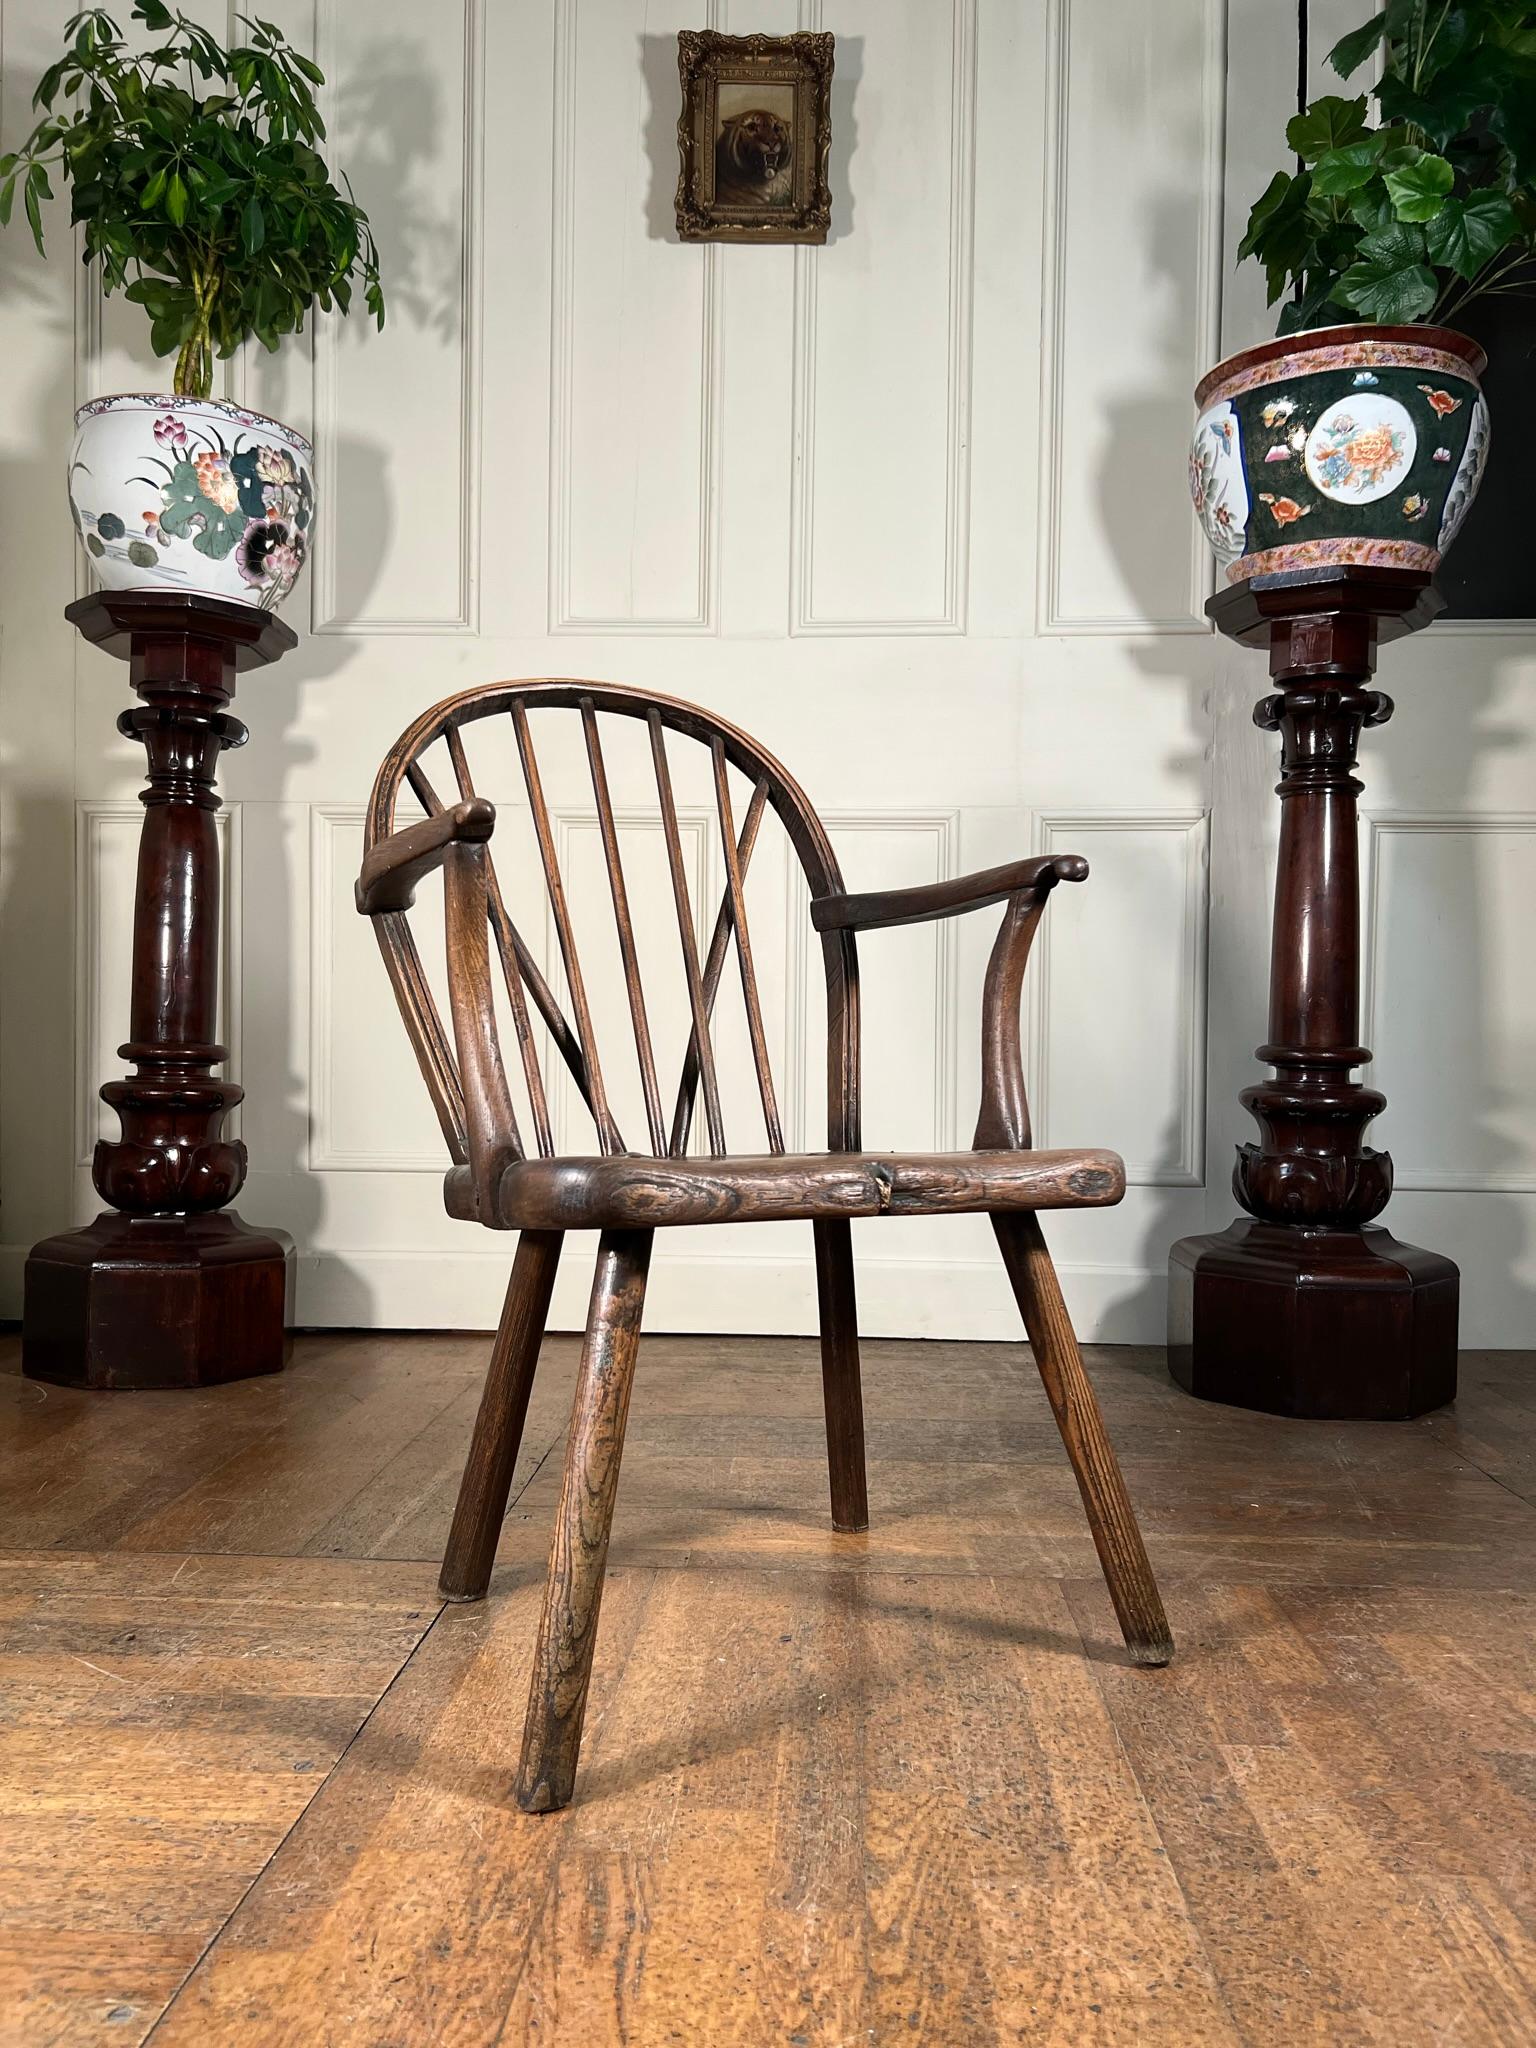 Rare, 18th century primitive hoop back stick chair.

Constructed from ash and elm, from the Thames Valley region.

A work of art.

Measurements: 80cm h / 37cm h seat x 46cm w x 40cm d

(measurements are approximate and are taken at the maximum